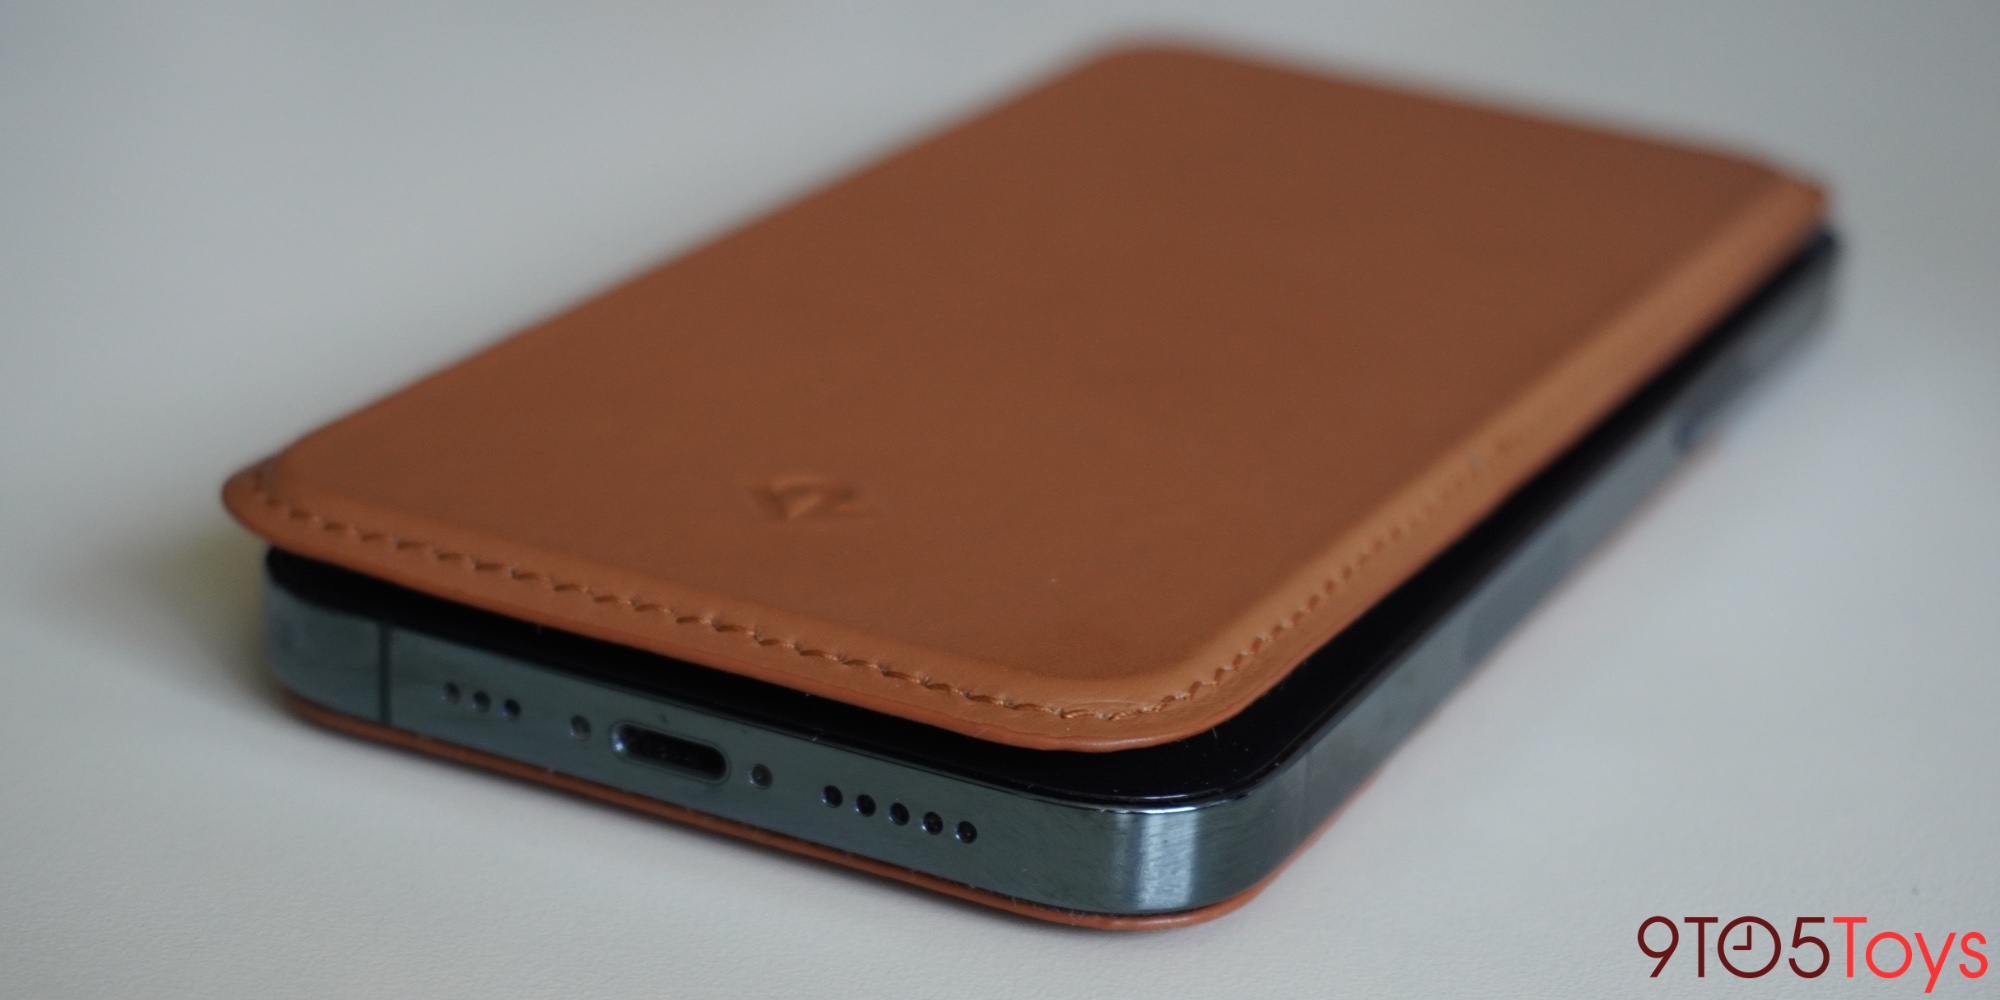 Tested: Twelve South’s MagSafe SurfacePad delivers an ultra-thin iPhone 12 wallet case